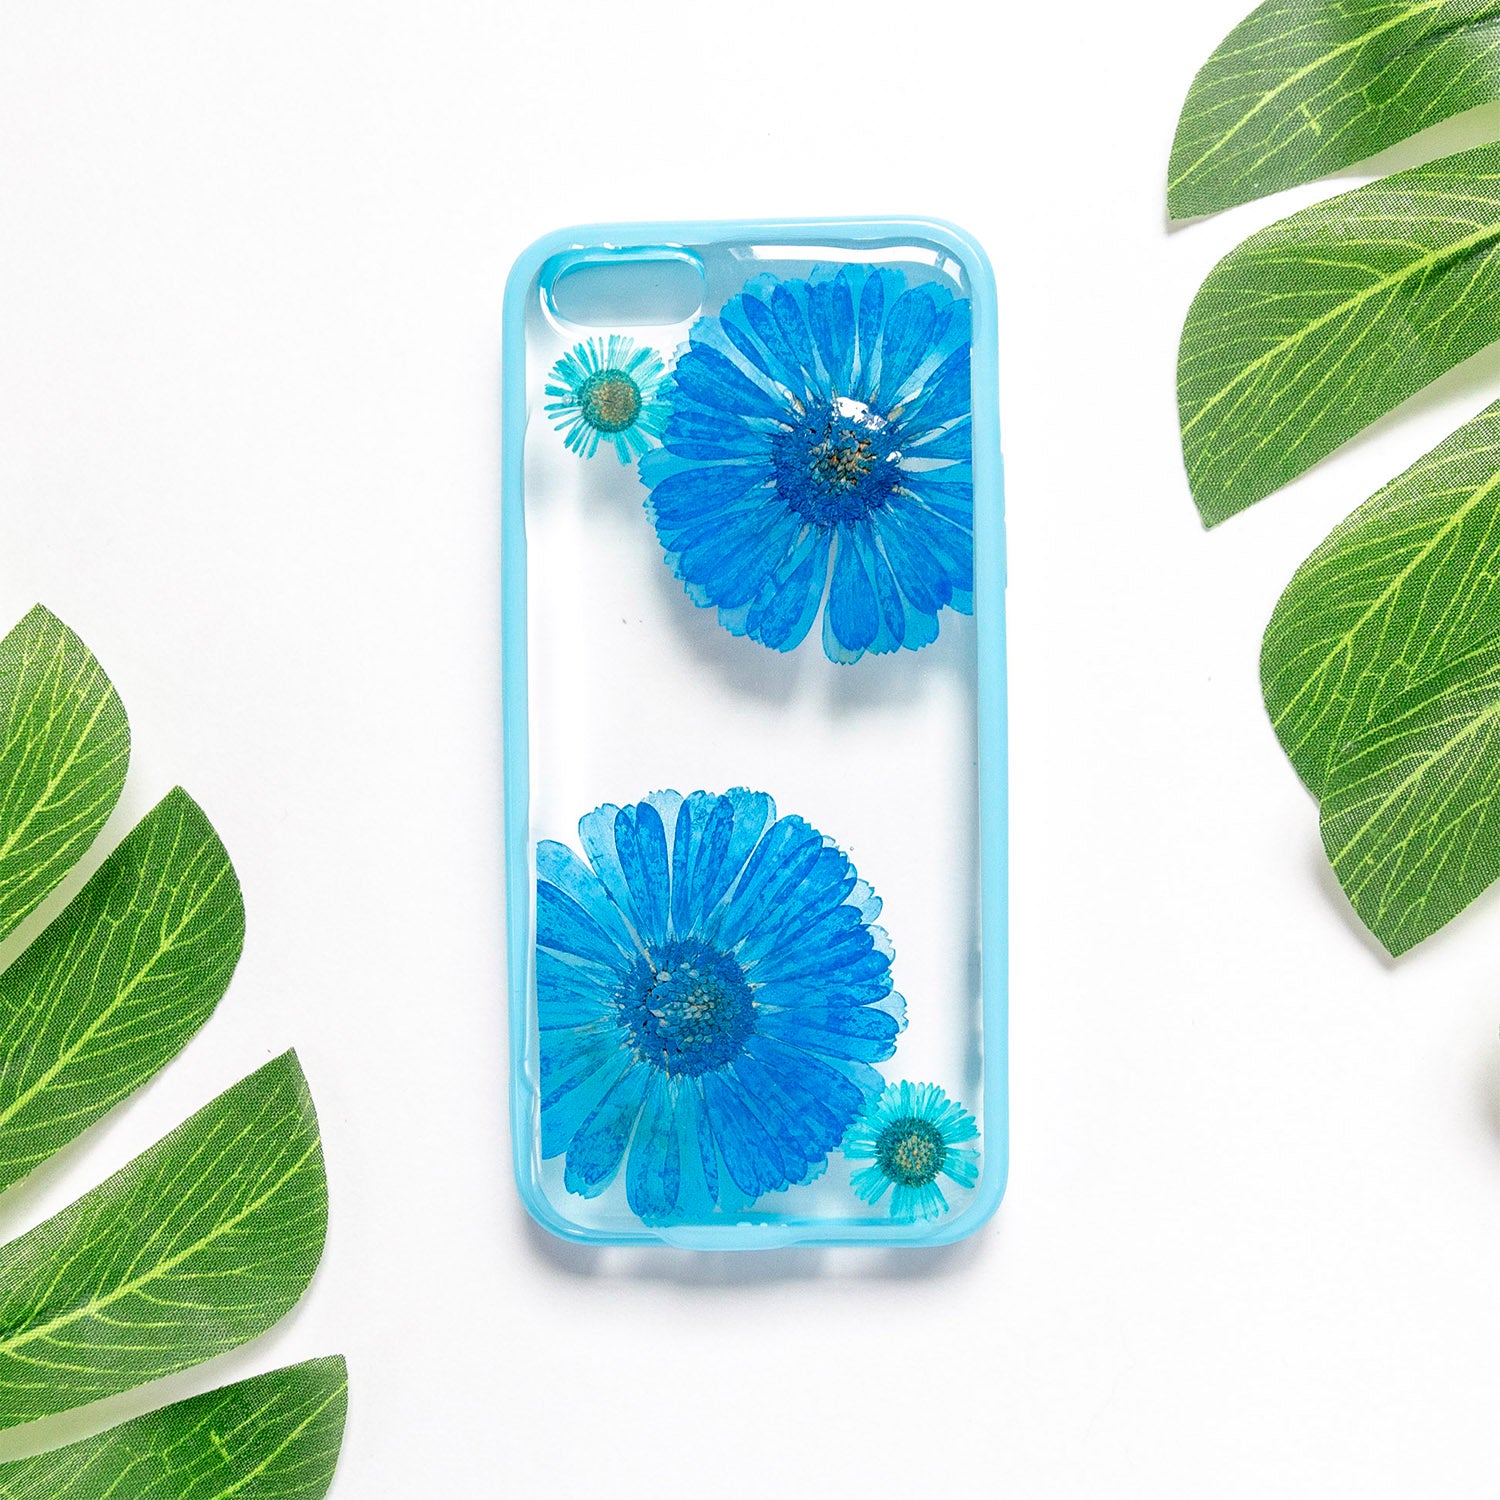 Floral Neverland Floralfy Blue Sapphire Real Pressed Blue Daisy Flower Floral Foliage Botanical iPhone 5 5s SE Bumper Case 01